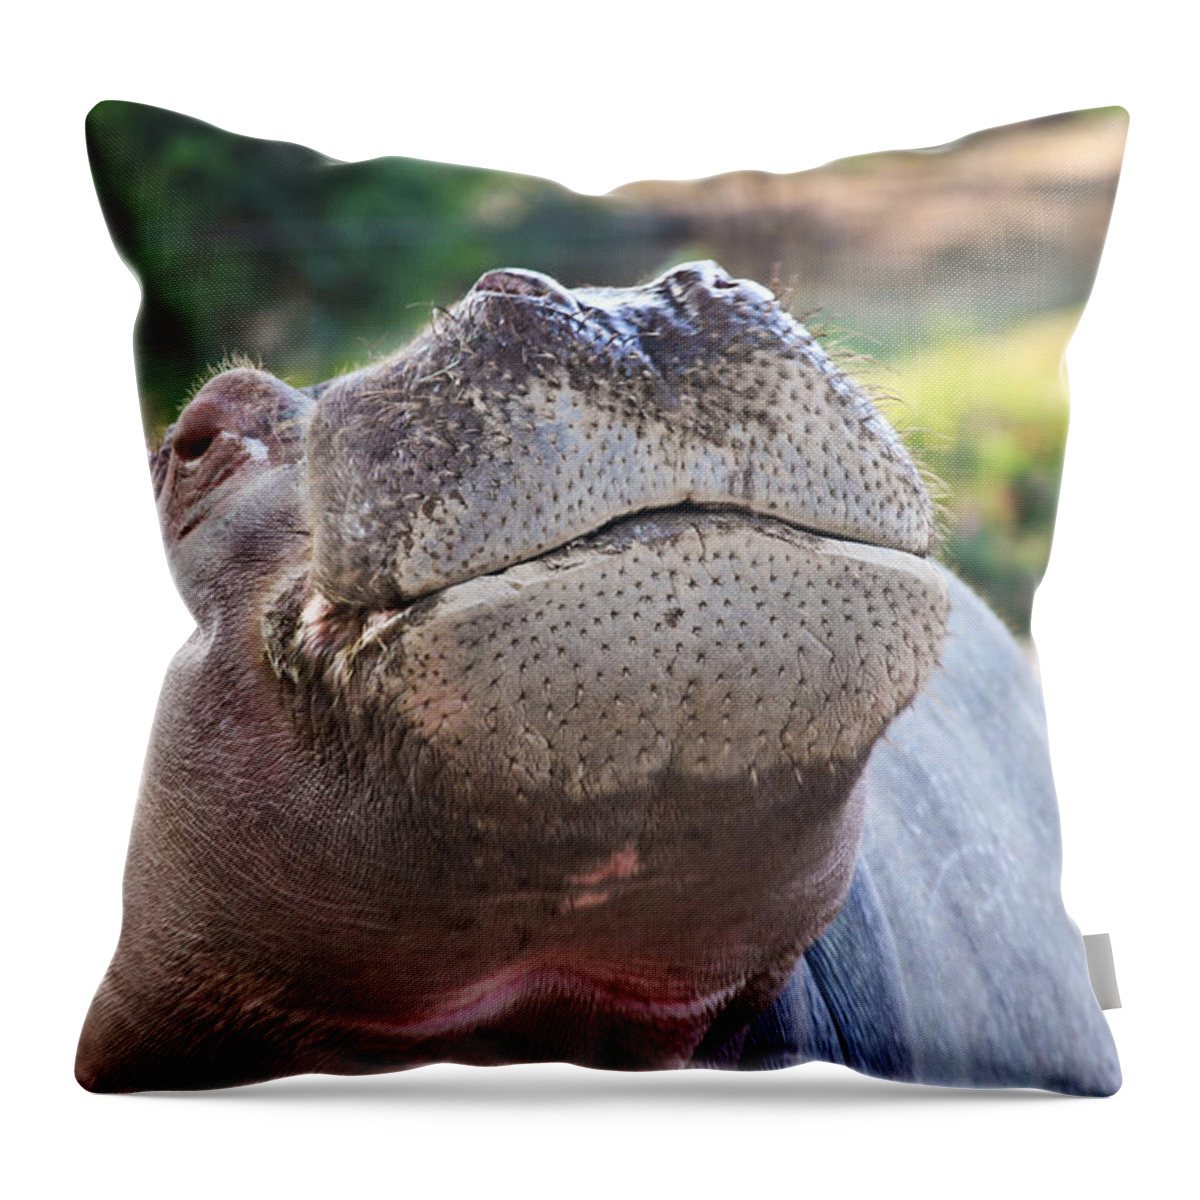 Hippo Throw Pillow featuring the photograph Give me a kiss hippo by Eti Reid